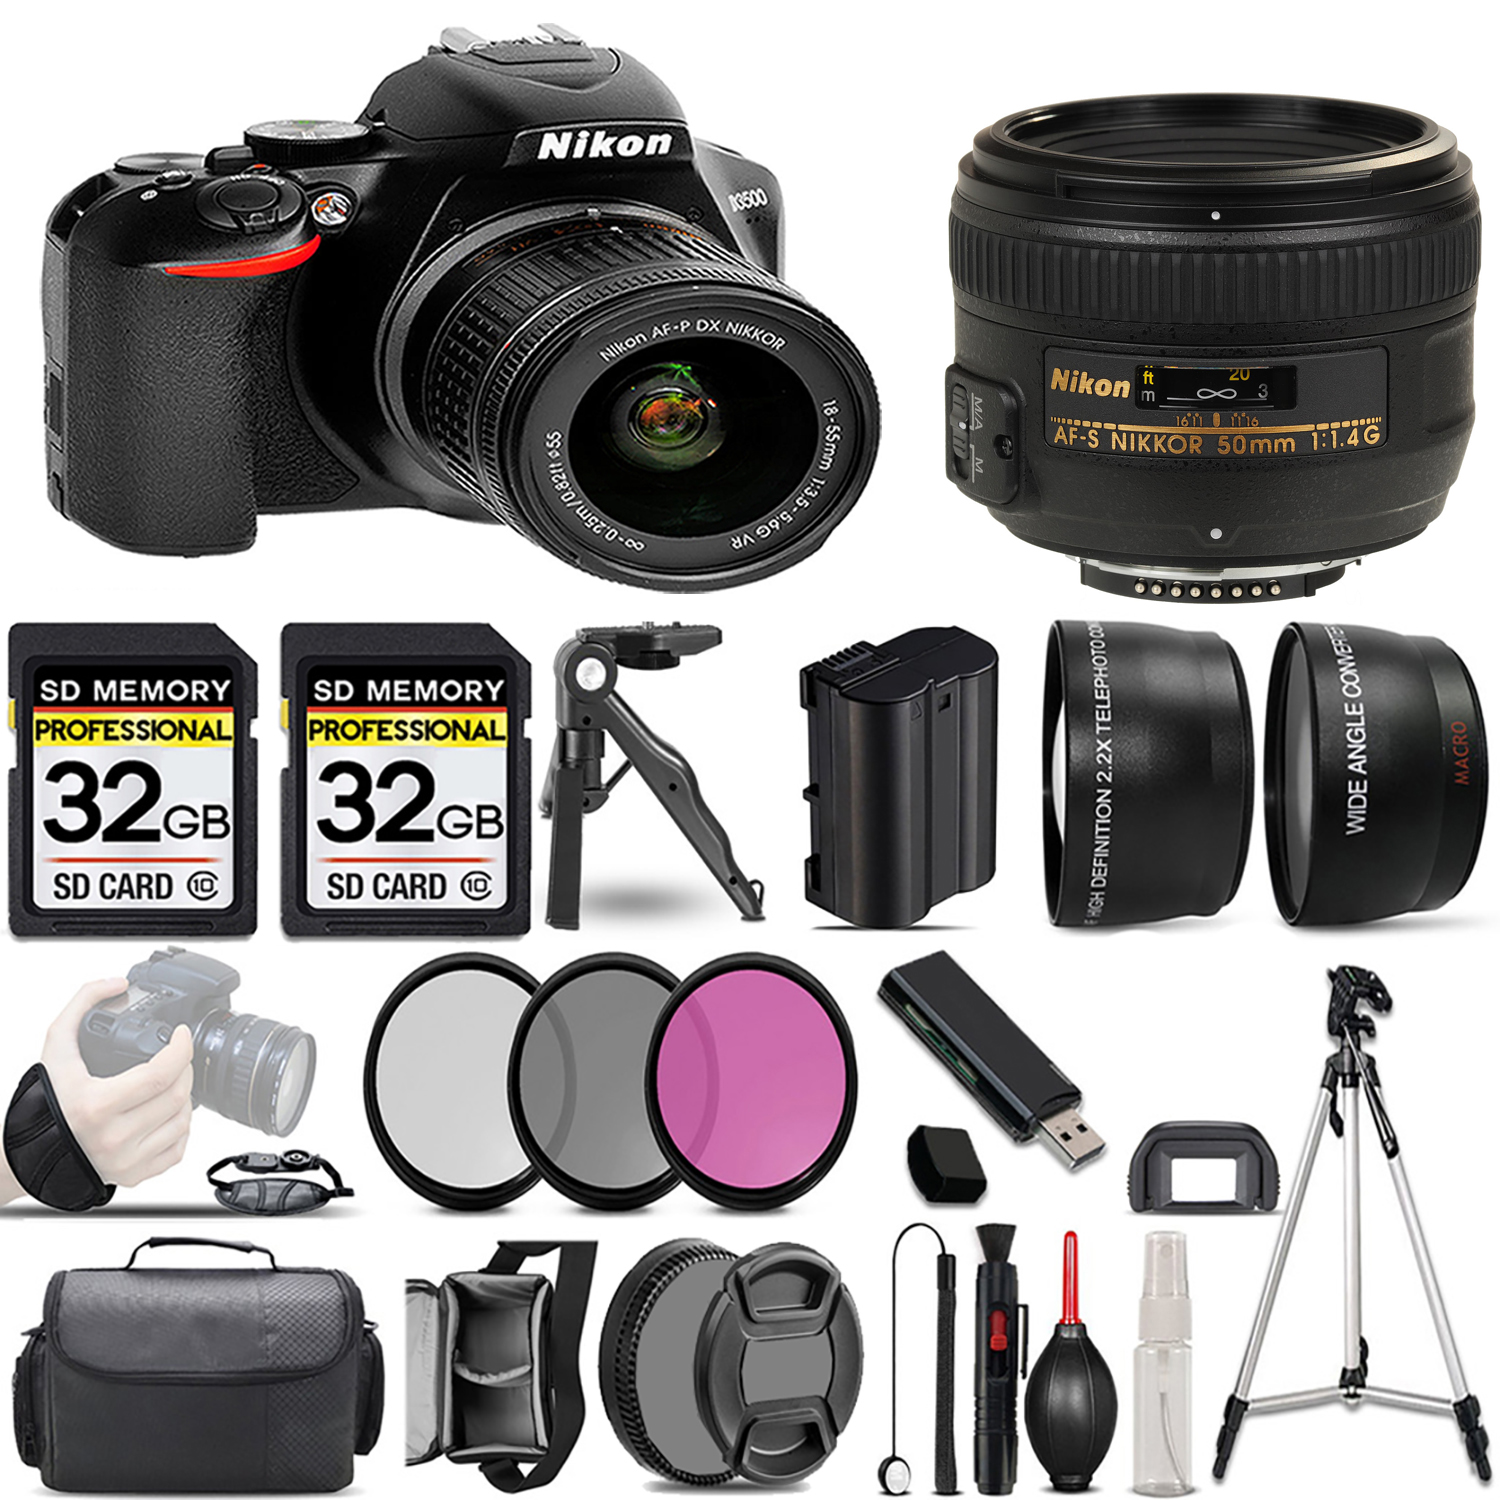 D3500 DSLR Camera with 18-55mm Lens + 50mm f/1.4G Lens + 3 Piece Filter Set + 64GB *FREE SHIPPING*